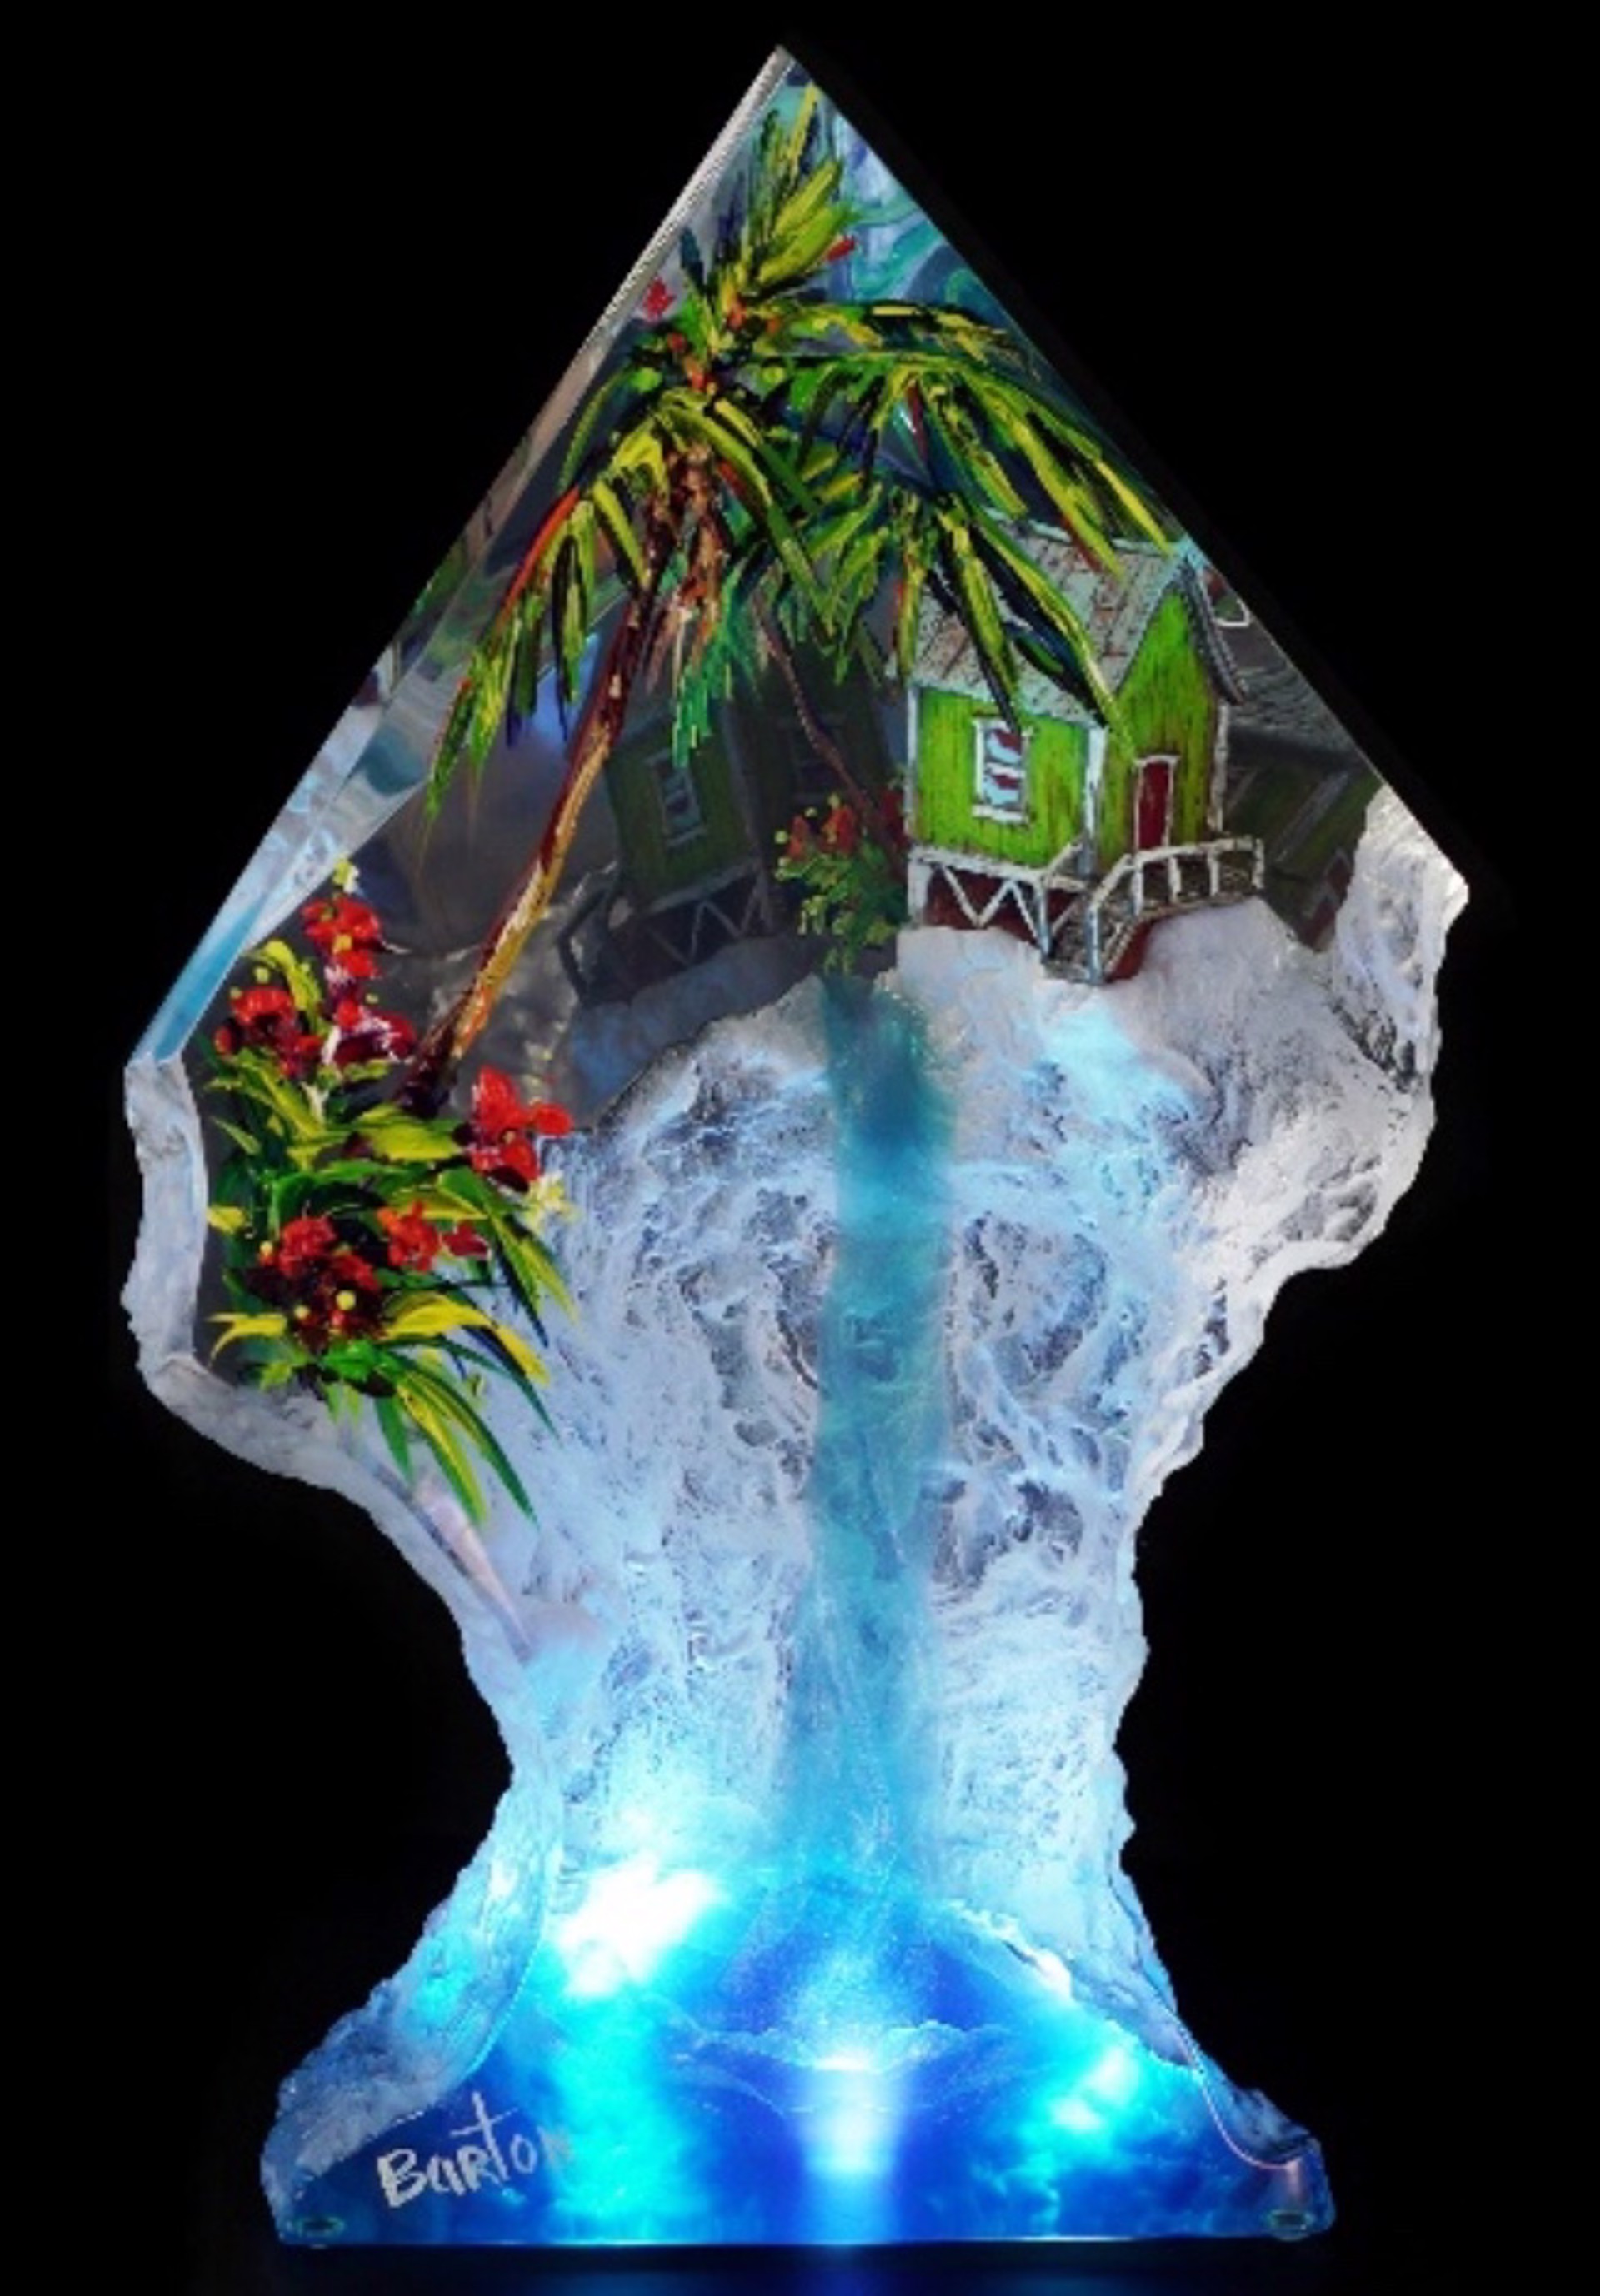 Paradise Falls Sculpture (Only the Limitied Edition is Avaliable) by 